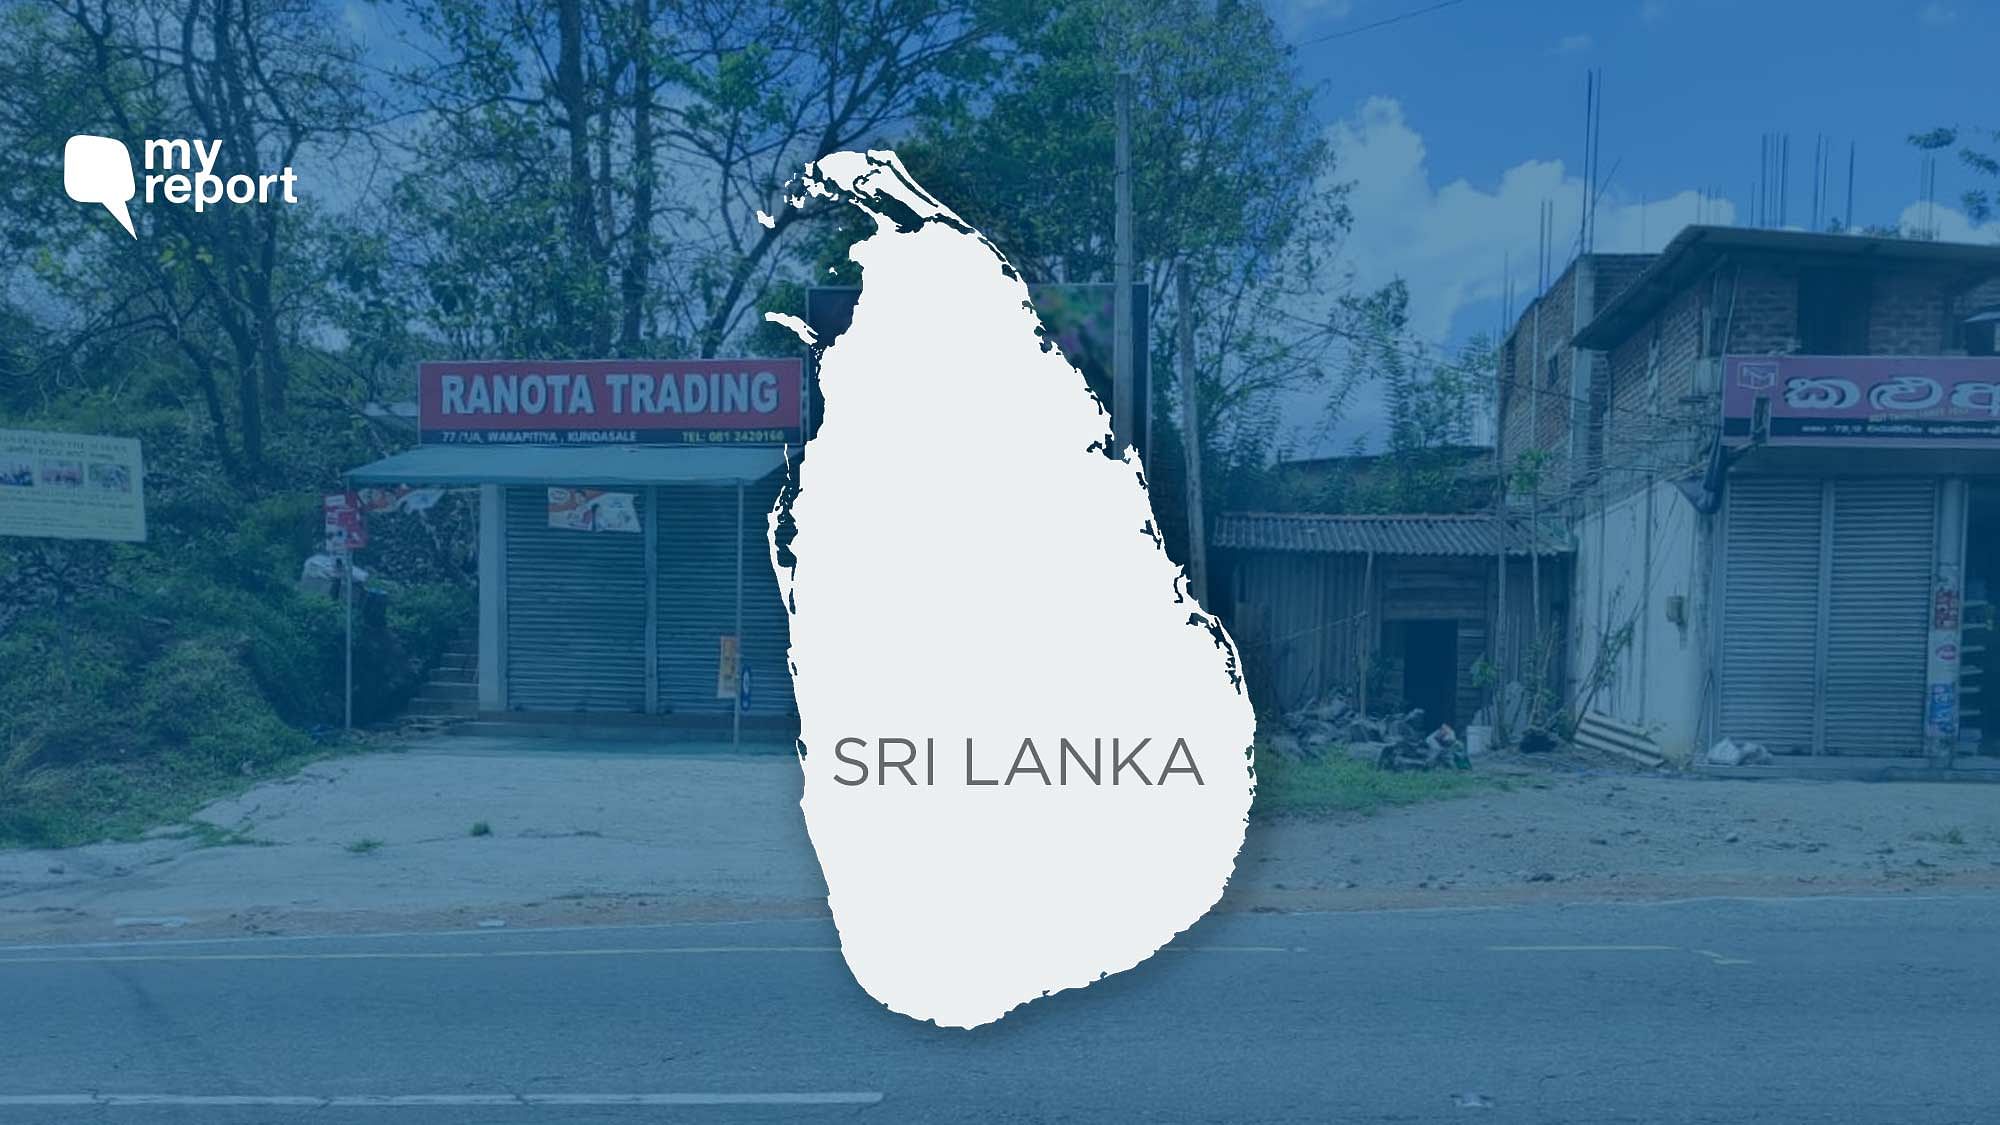 Indians are stranded in Sri Lanka due to the coronavirus lockdown in both countries.